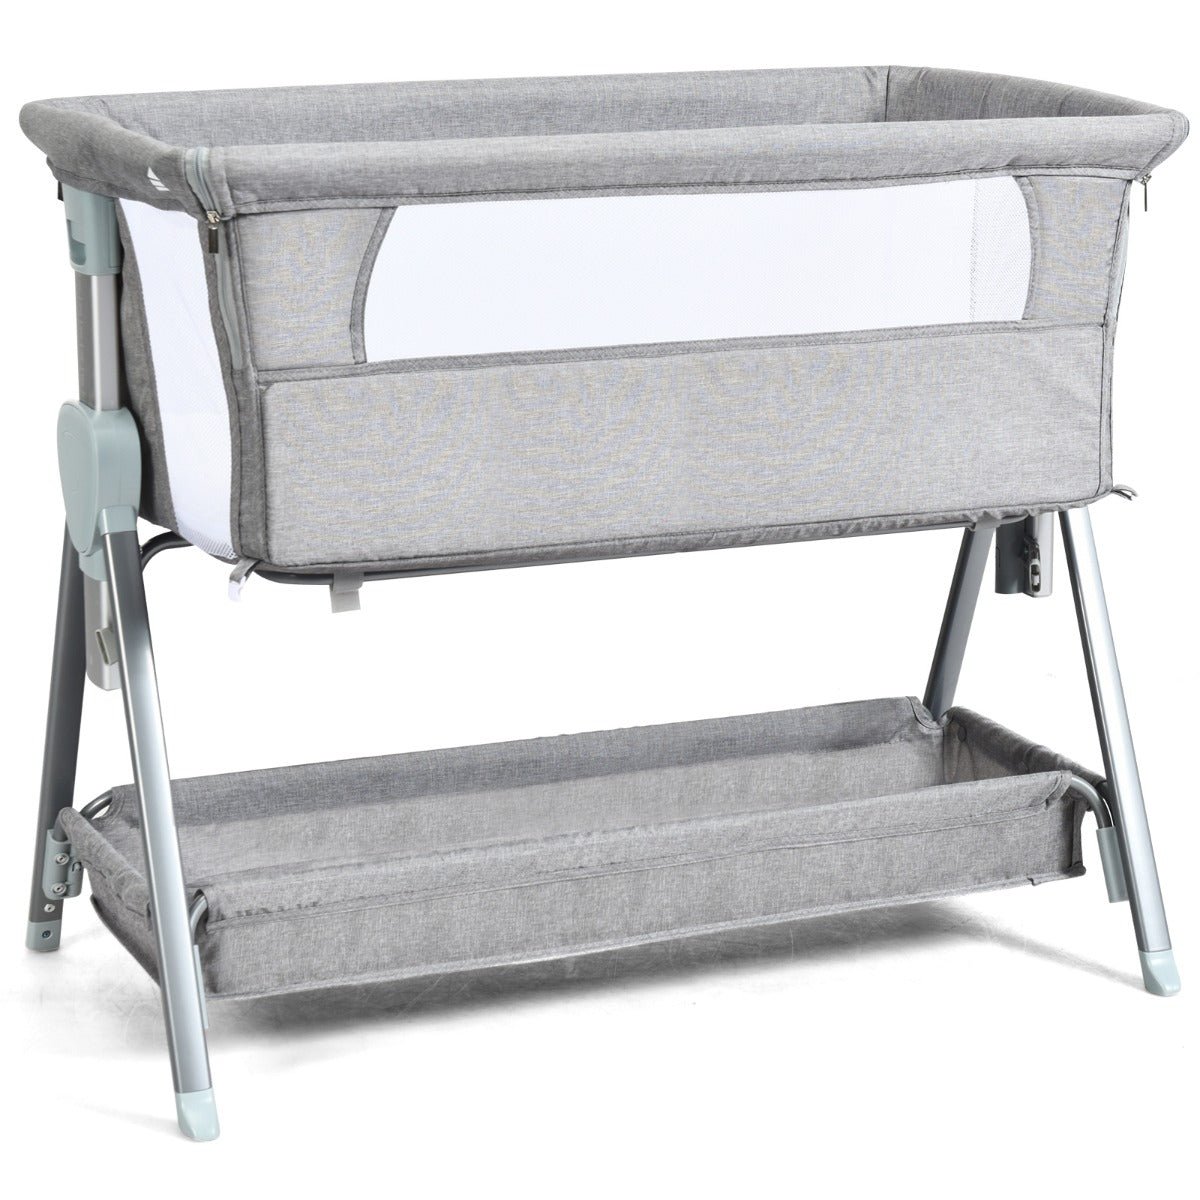 Explore Convenience: Grey Height Adjustable Baby Cot with Wheels